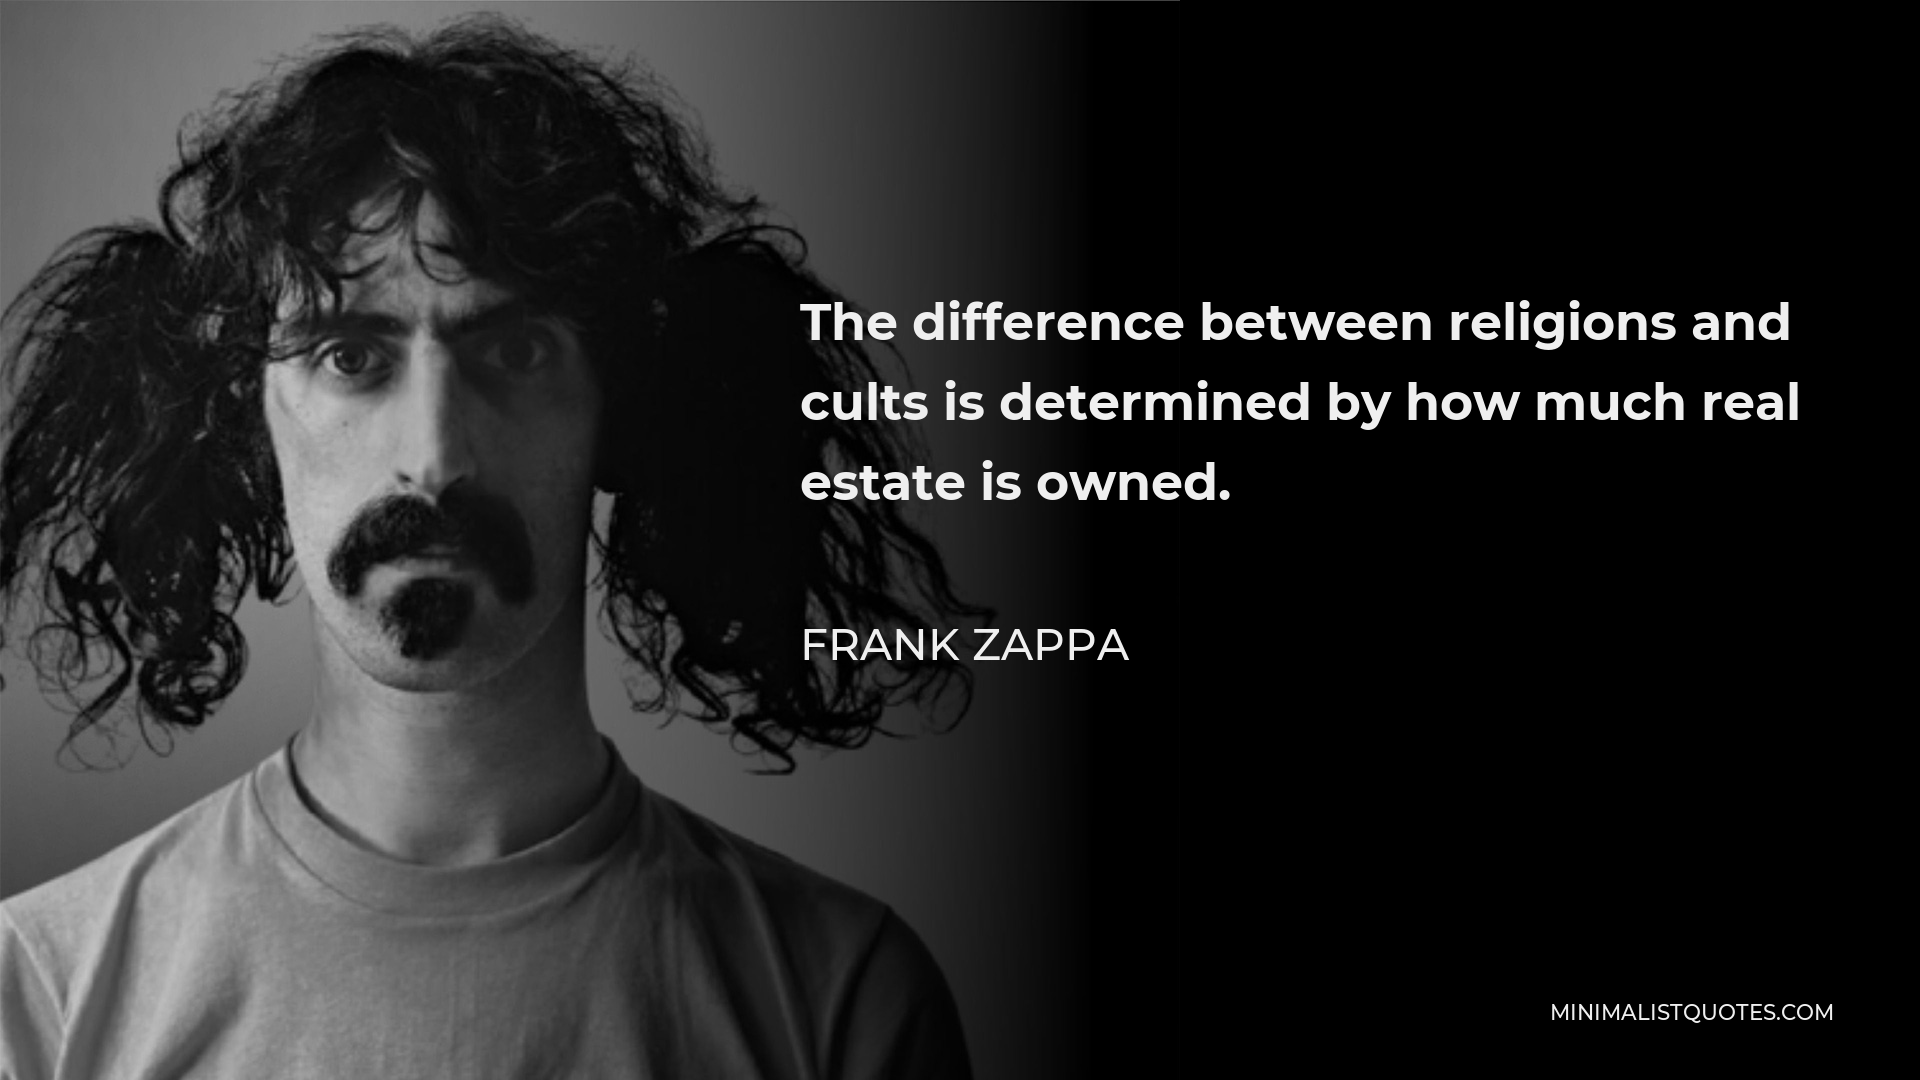 Frank Zappa Quote - The difference between religions and cults is determined by how much real estate is owned.